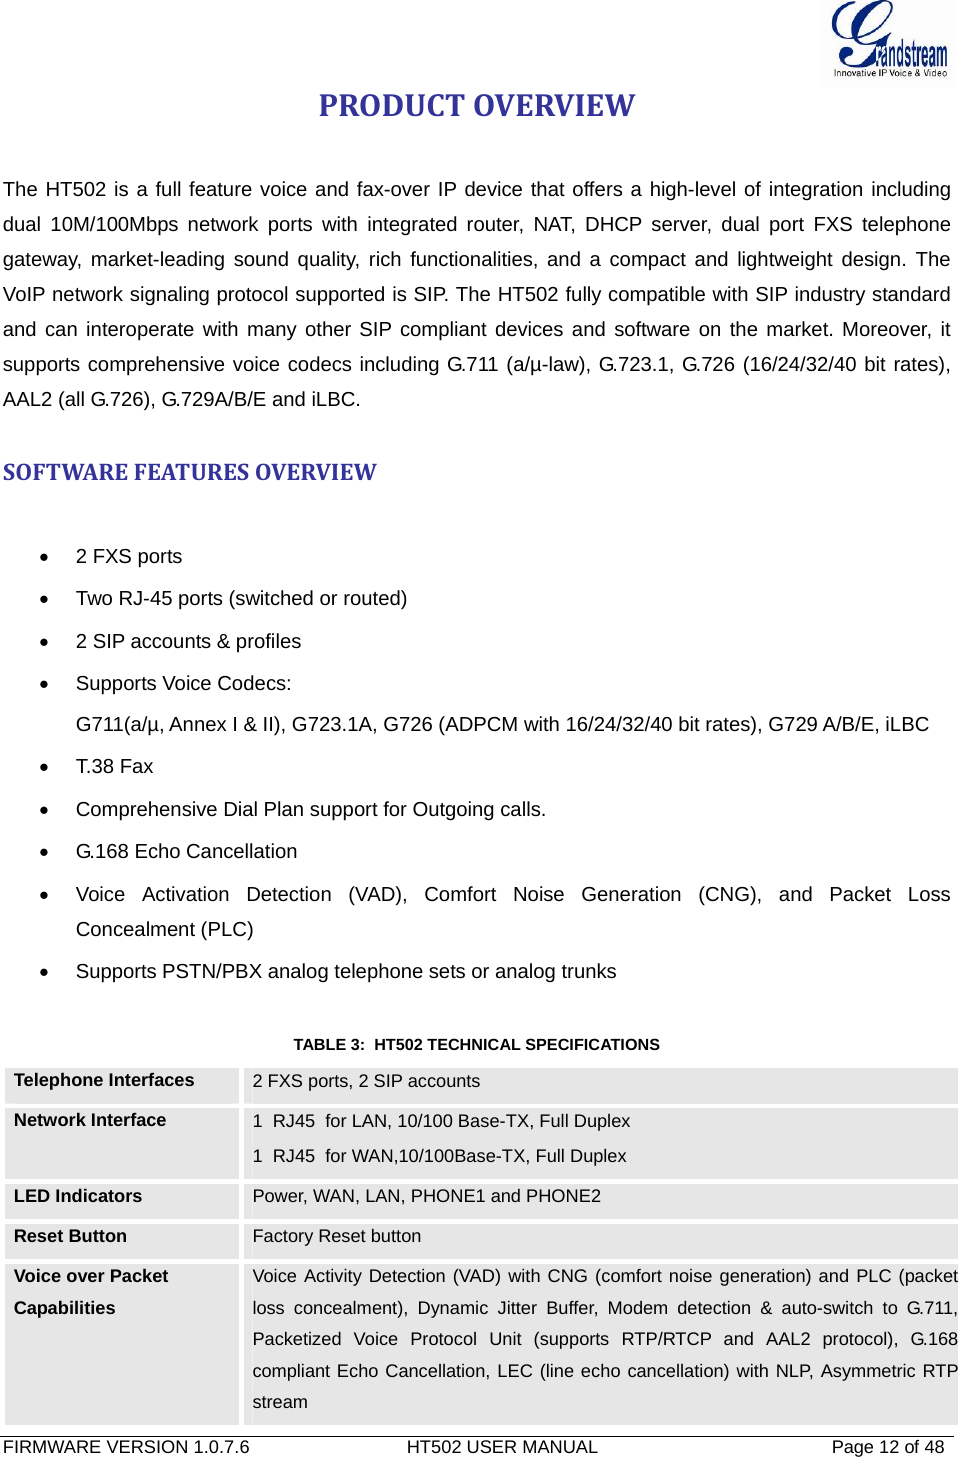  FIRMWARE VERSION 1.0.7.6                               HT502 USER MANUAL                                              Page 12 of 48   PRODUCTOVERVIEW The HT502 is a full feature voice and fax-over IP device that offers a high-level of integration including dual 10M/100Mbps network ports with integrated router, NAT, DHCP server, dual port FXS telephone gateway, market-leading sound quality, rich functionalities, and a compact and lightweight design. The VoIP network signaling protocol supported is SIP. The HT502 fully compatible with SIP industry standard and can interoperate with many other SIP compliant devices and software on the market. Moreover, it supports comprehensive voice codecs including G.711 (a/µ-law), G.723.1, G.726 (16/24/32/40 bit rates), AAL2 (all G.726), G.729A/B/E and iLBC.  SOFTWAREFEATURESOVERVIEW•  2 FXS ports •  Two RJ-45 ports (switched or routed) •  2 SIP accounts &amp; profiles • Supports Voice Codecs:  G711(a/µ, Annex I &amp; II), G723.1A, G726 (ADPCM with 16/24/32/40 bit rates), G729 A/B/E, iLBC •  T.38 Fax  •  Comprehensive Dial Plan support for Outgoing calls. •  G.168 Echo Cancellation •  Voice Activation Detection (VAD), Comfort Noise Generation (CNG), and Packet Loss Concealment (PLC) •  Supports PSTN/PBX analog telephone sets or analog trunks  TABLE 3:  HT502 TECHNICAL SPECIFICATIONS Telephone Interfaces  2 FXS ports, 2 SIP accounts   Network Interface  1  RJ45  for LAN, 10/100 Base-TX, Full Duplex 1  RJ45  for WAN,10/100Base-TX, Full Duplex LED Indicators  Power, WAN, LAN, PHONE1 and PHONE2 Reset Button  Factory Reset button Voice over Packet Capabilities Voice Activity Detection (VAD) with CNG (comfort noise generation) and PLC (packet loss concealment), Dynamic Jitter Buffer, Modem detection &amp; auto-switch to G.711, Packetized Voice Protocol Unit (supports RTP/RTCP and AAL2 protocol), G.168 compliant Echo Cancellation, LEC (line echo cancellation) with NLP, Asymmetric RTP stream 